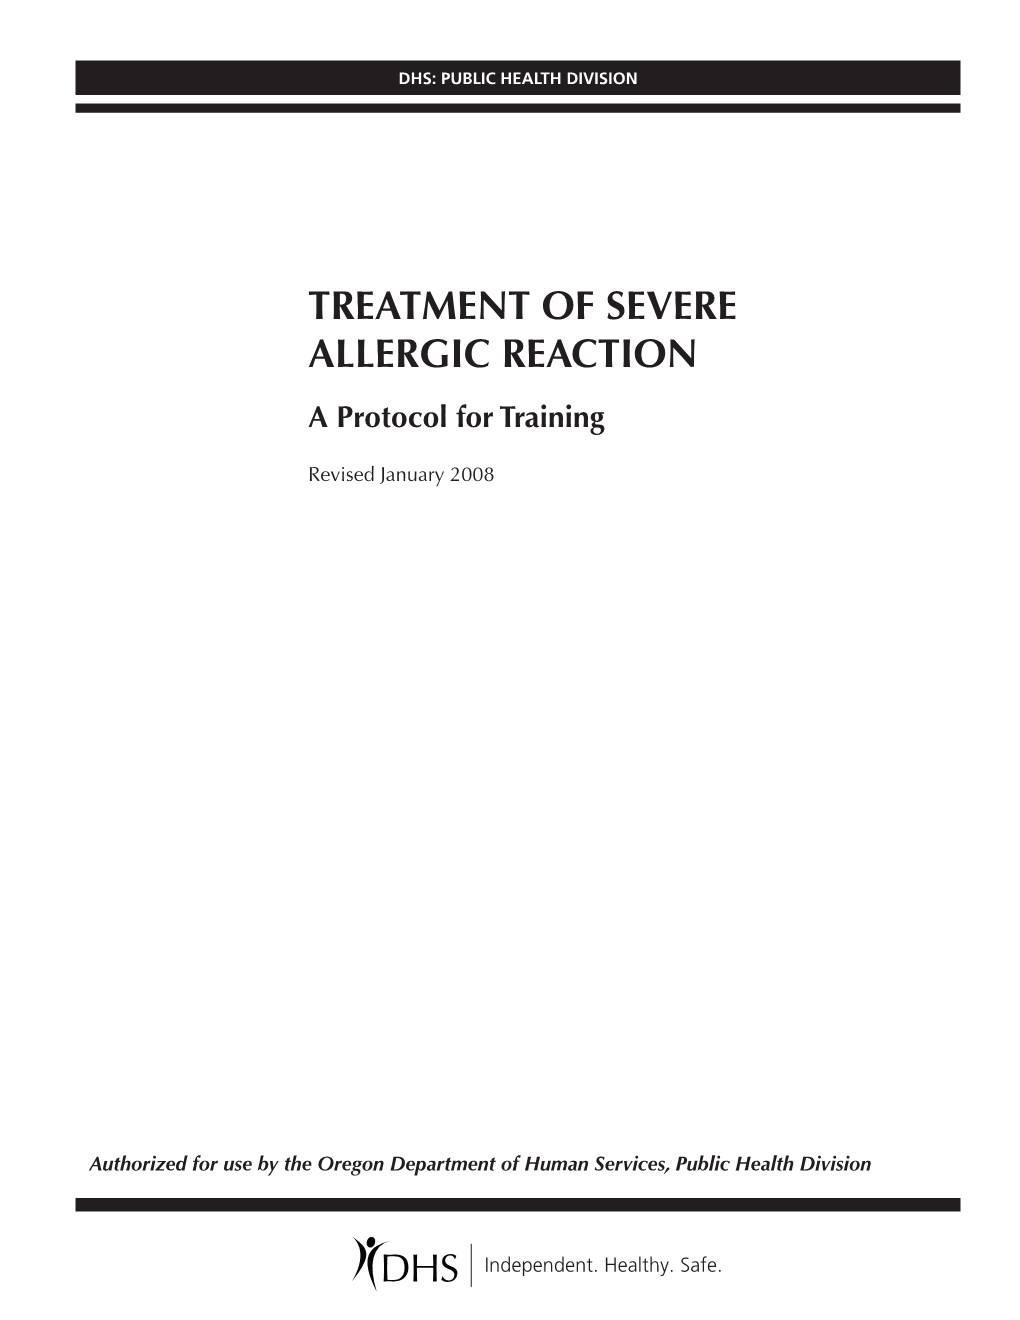 TREATMENT of SEVERE ALLERGIC REACTION a Protocol for Training